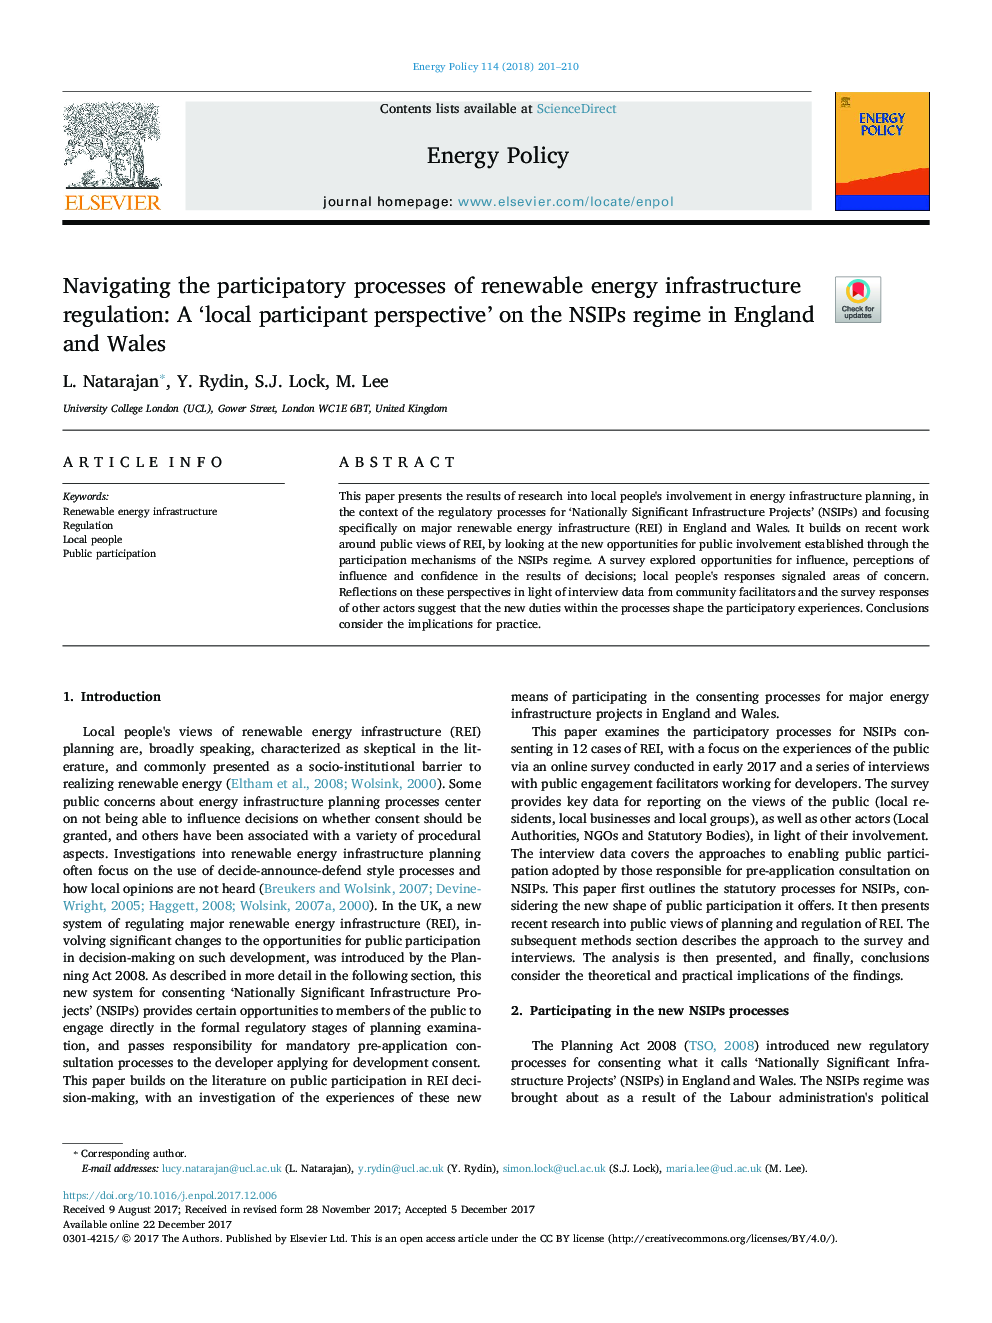 Navigating the participatory processes of renewable energy infrastructure regulation: A 'local participant perspective' on the NSIPs regime in England and Wales